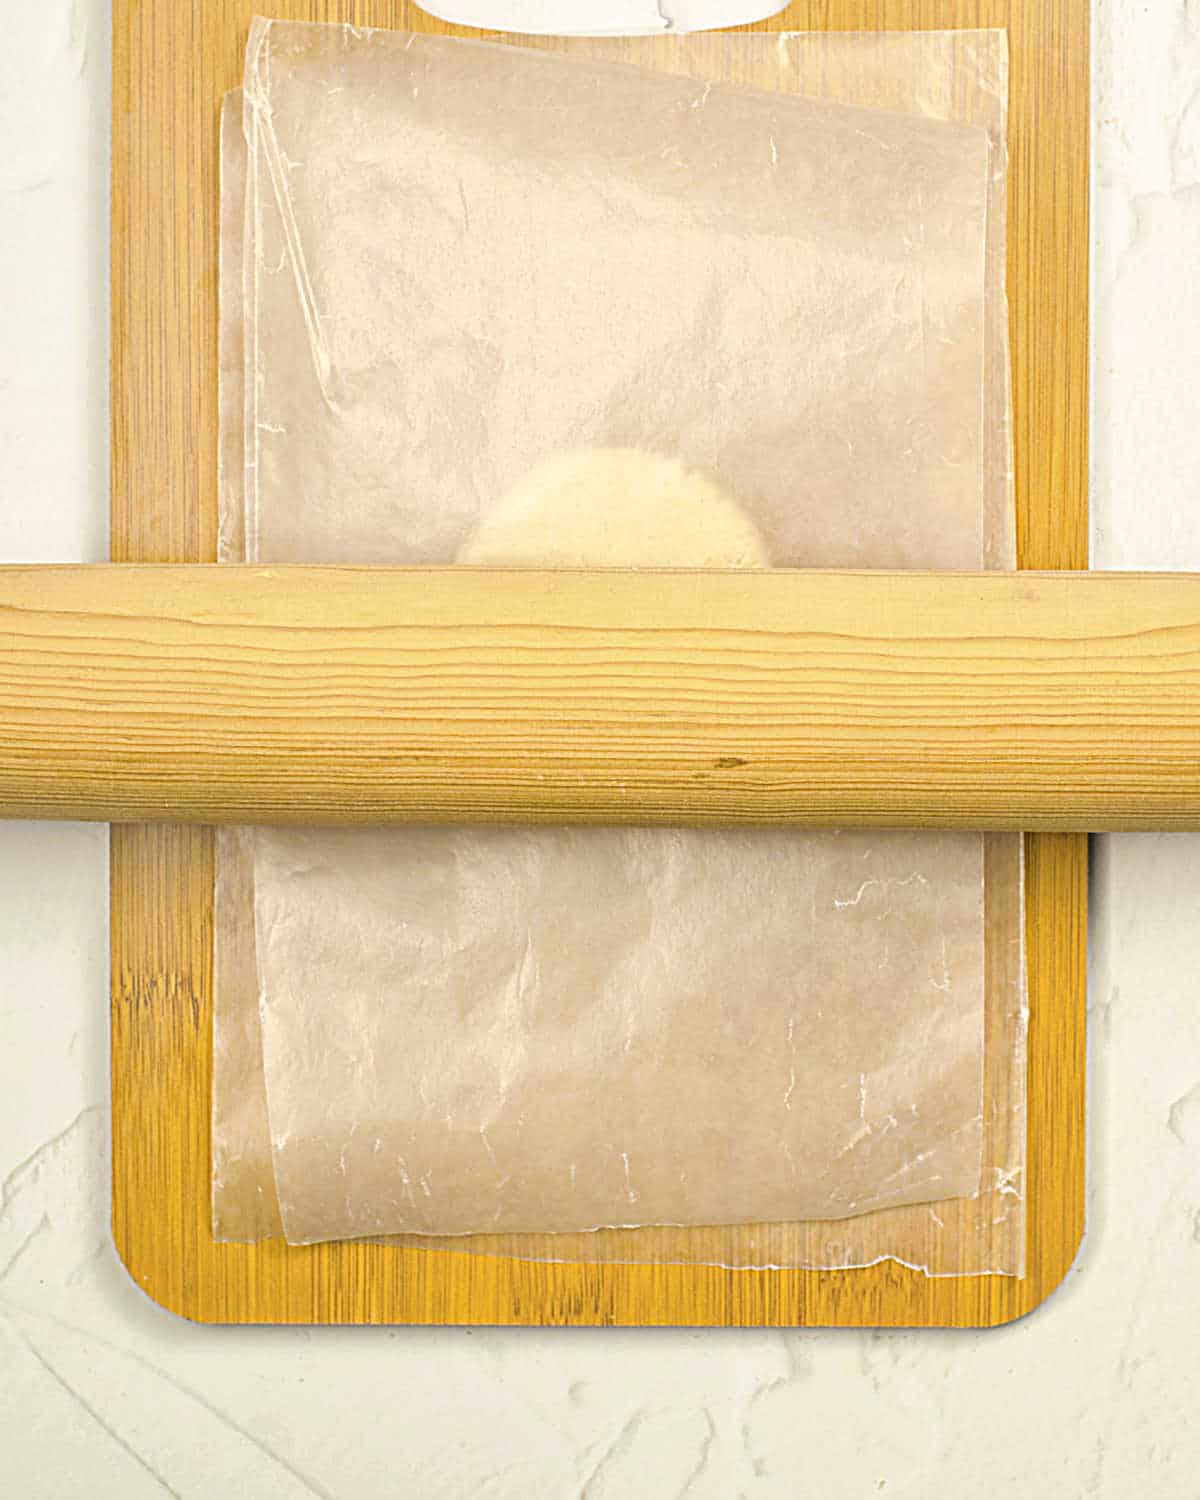 Rolling pin, a wooden board, and a tortilla dough ball between sheets of wax paper. Grey surface.